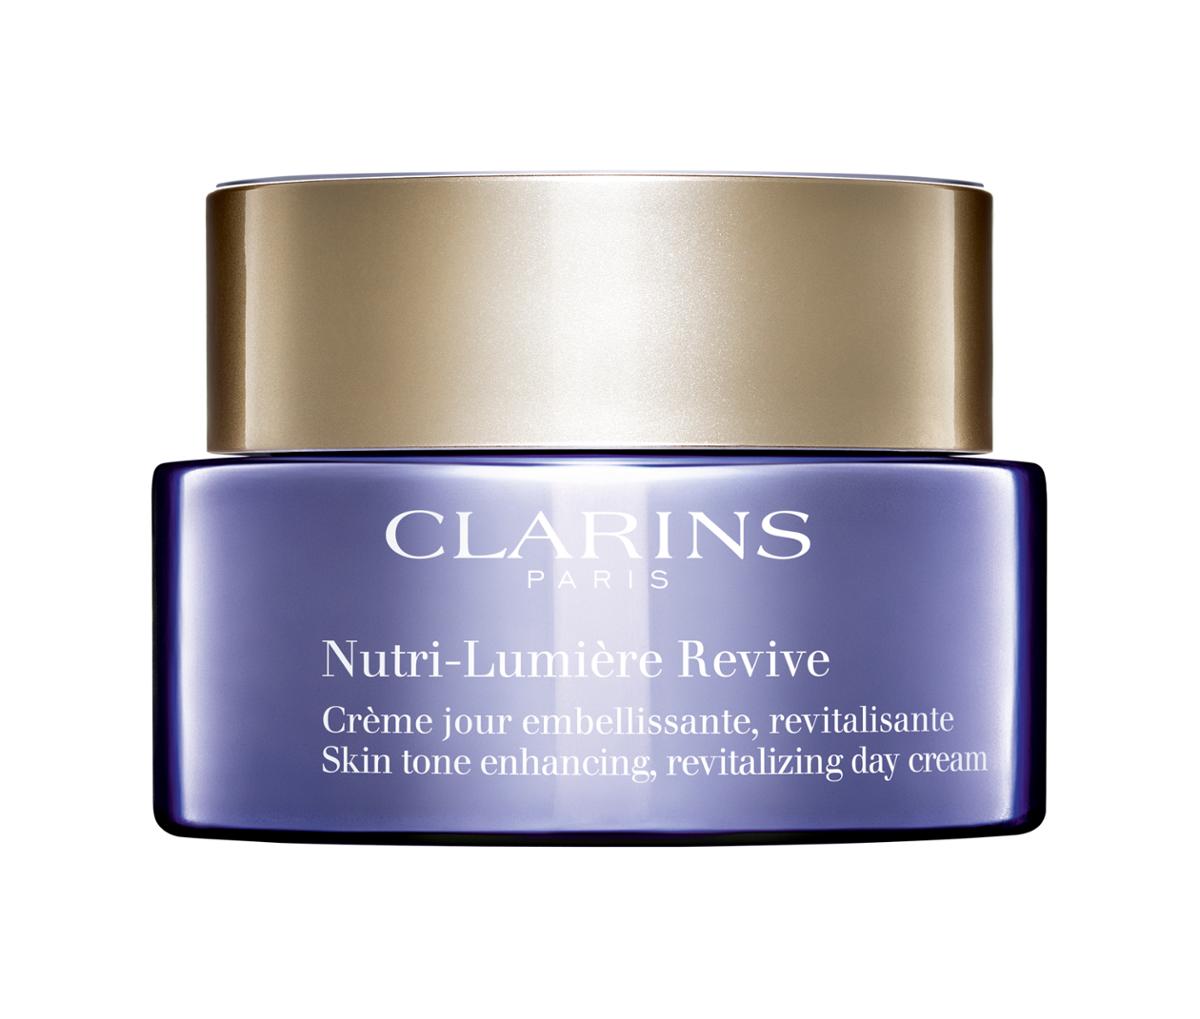 The Nutri-Lumière Revive formula contains illumining violet pearls and a violet-tinted texture to help skin regain its radiance / 